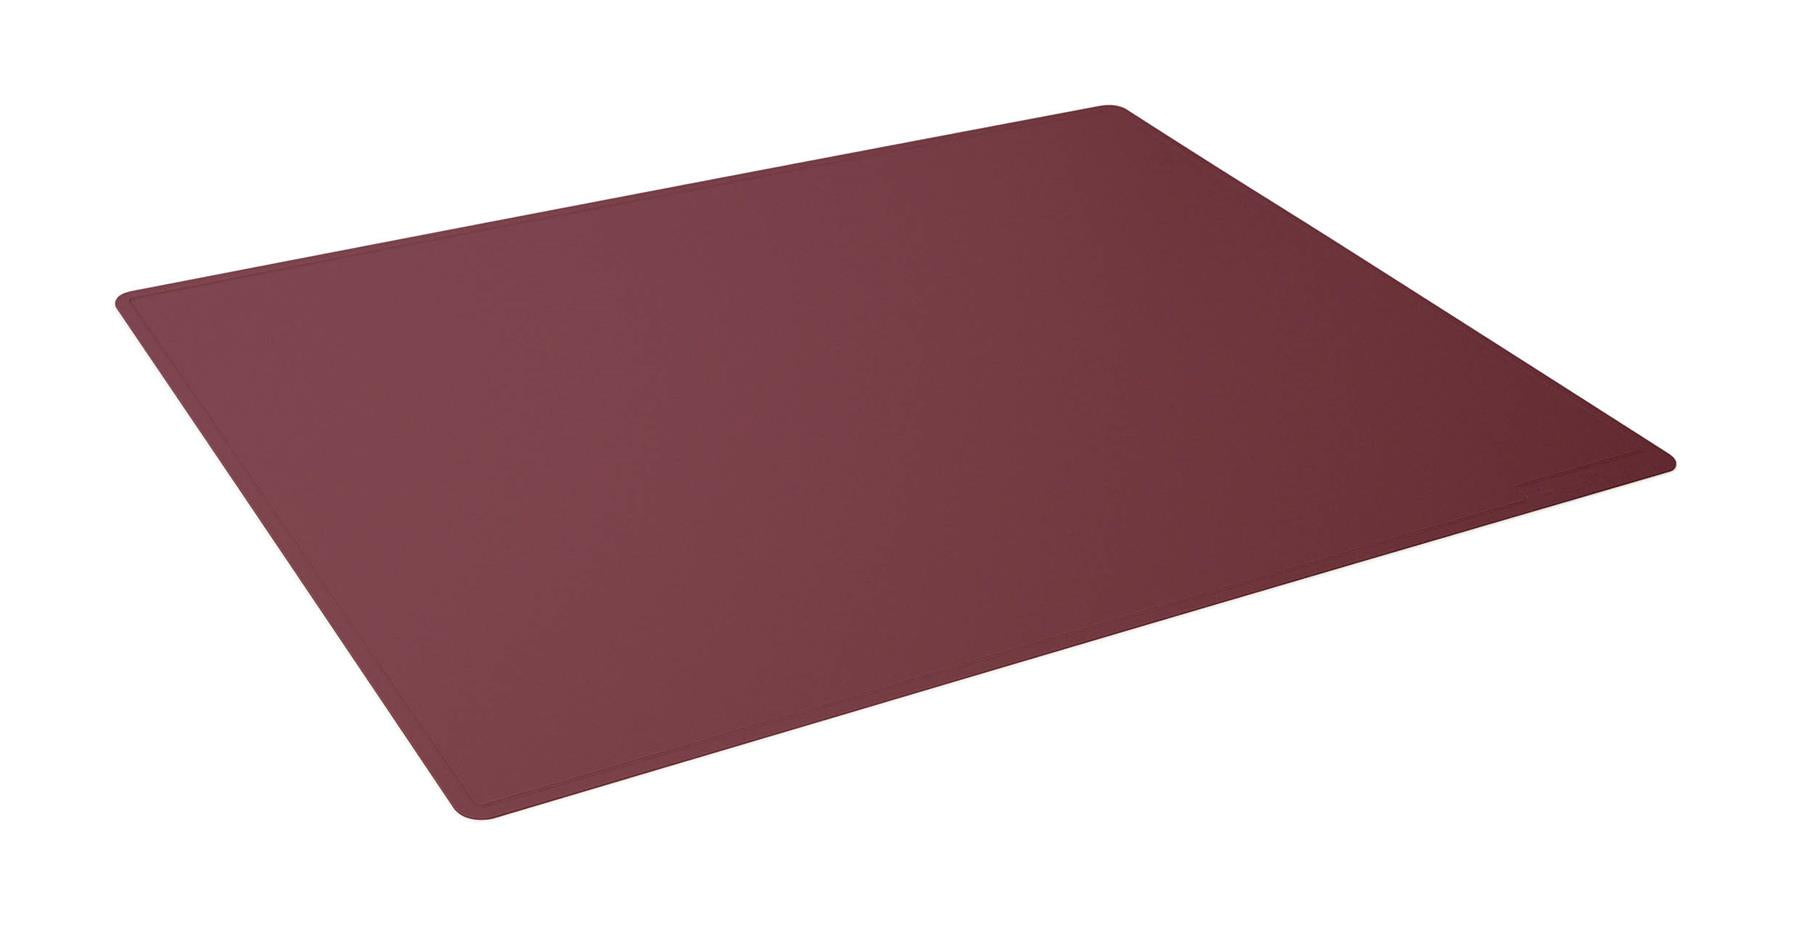 Durable Smooth Non-Slip Desk Mat Laptop PC Keyboard Mouse Pad | 53x40 cm | Red